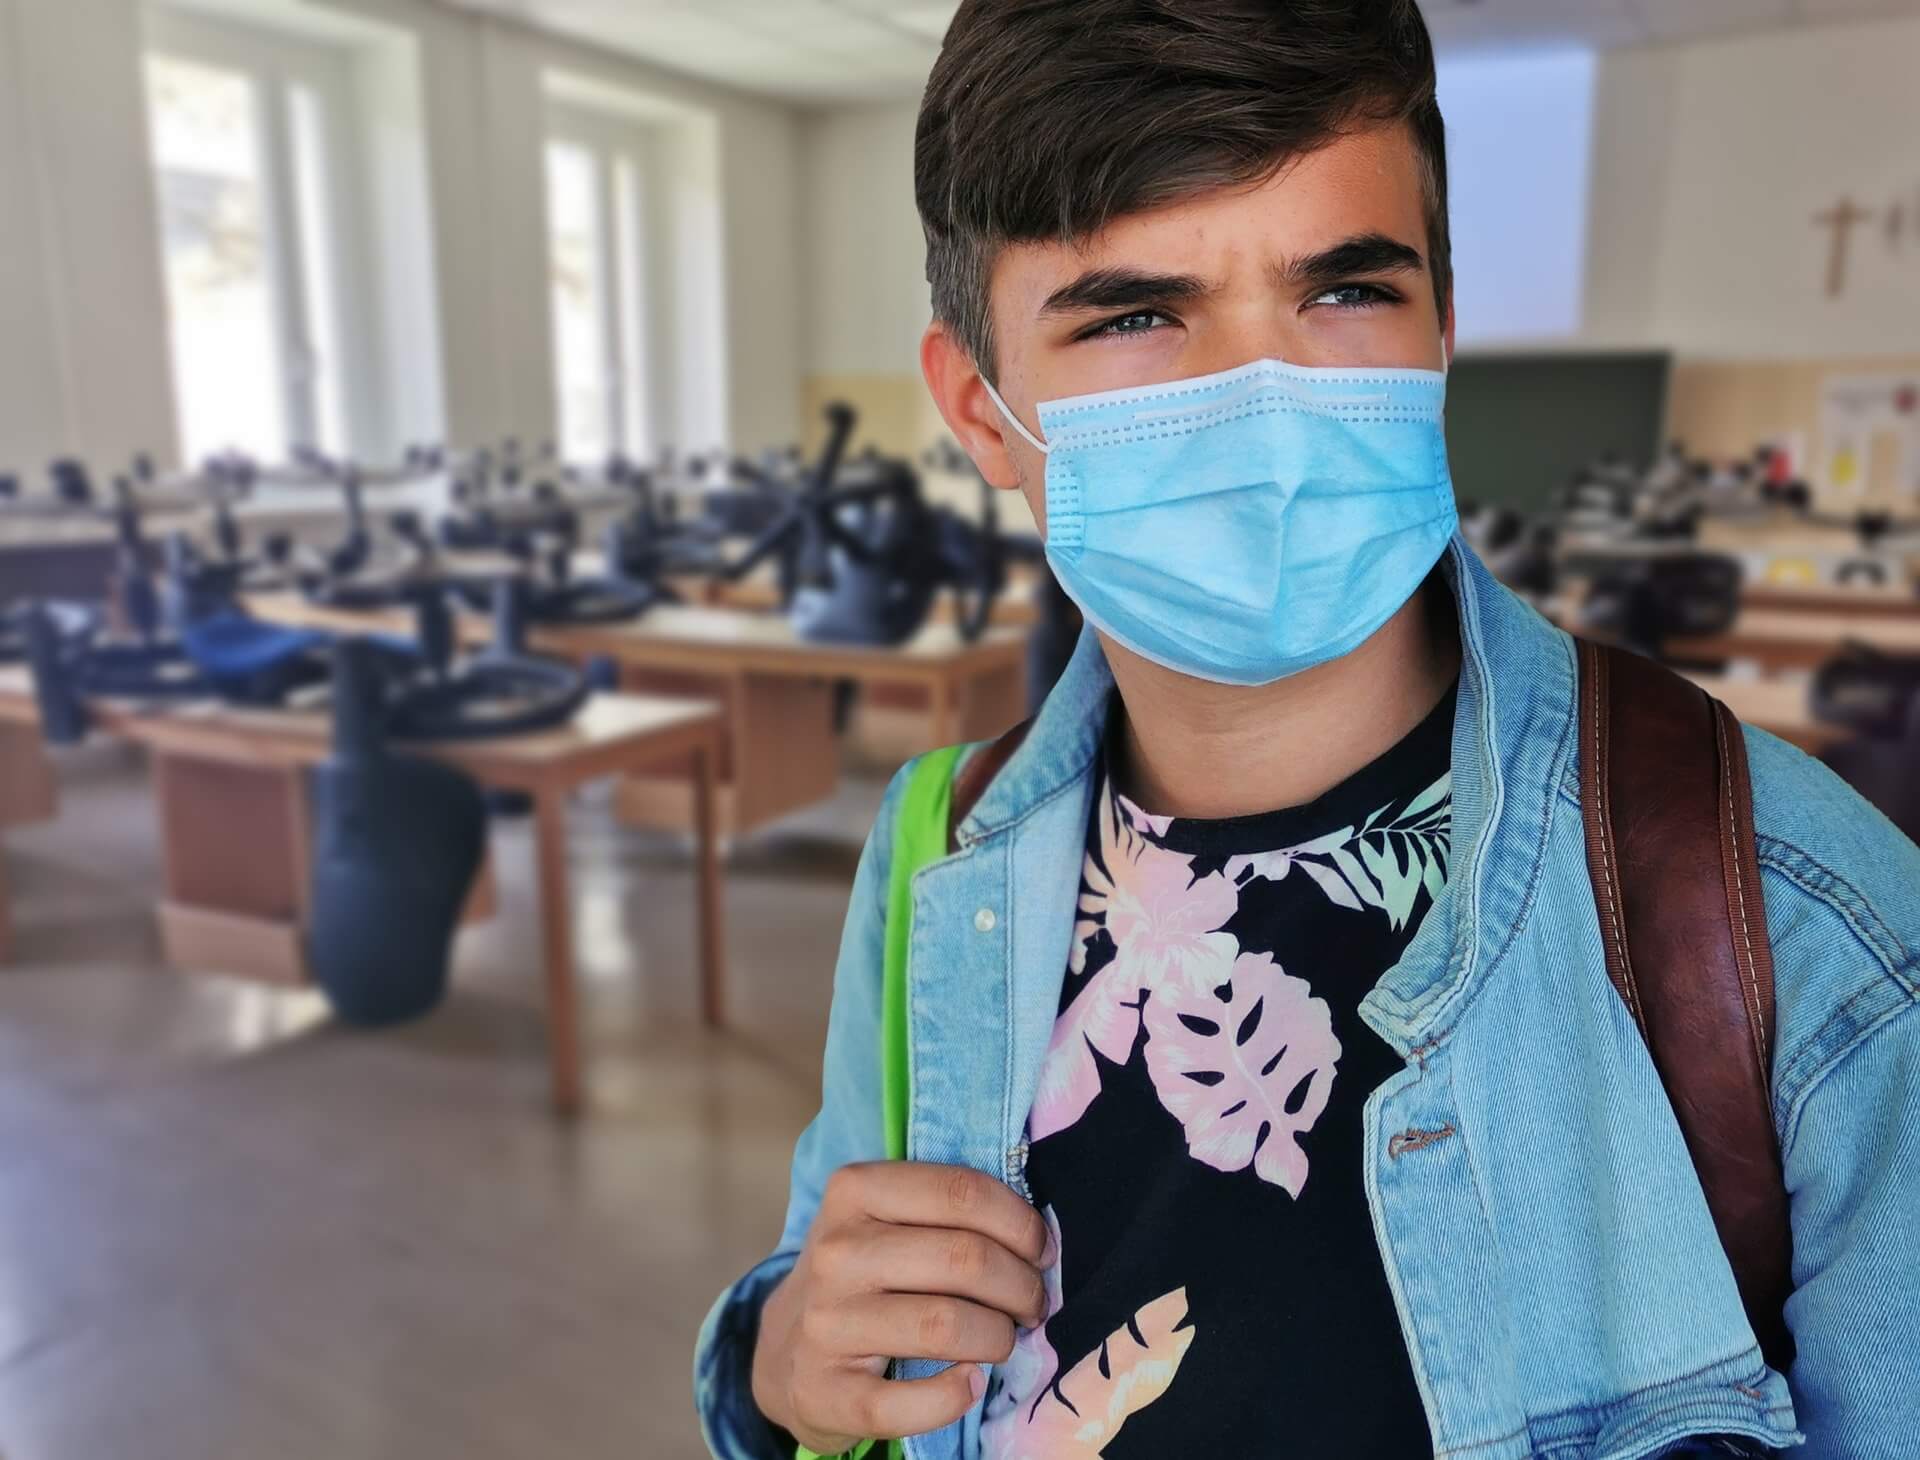 student wearing a mask during pandemic